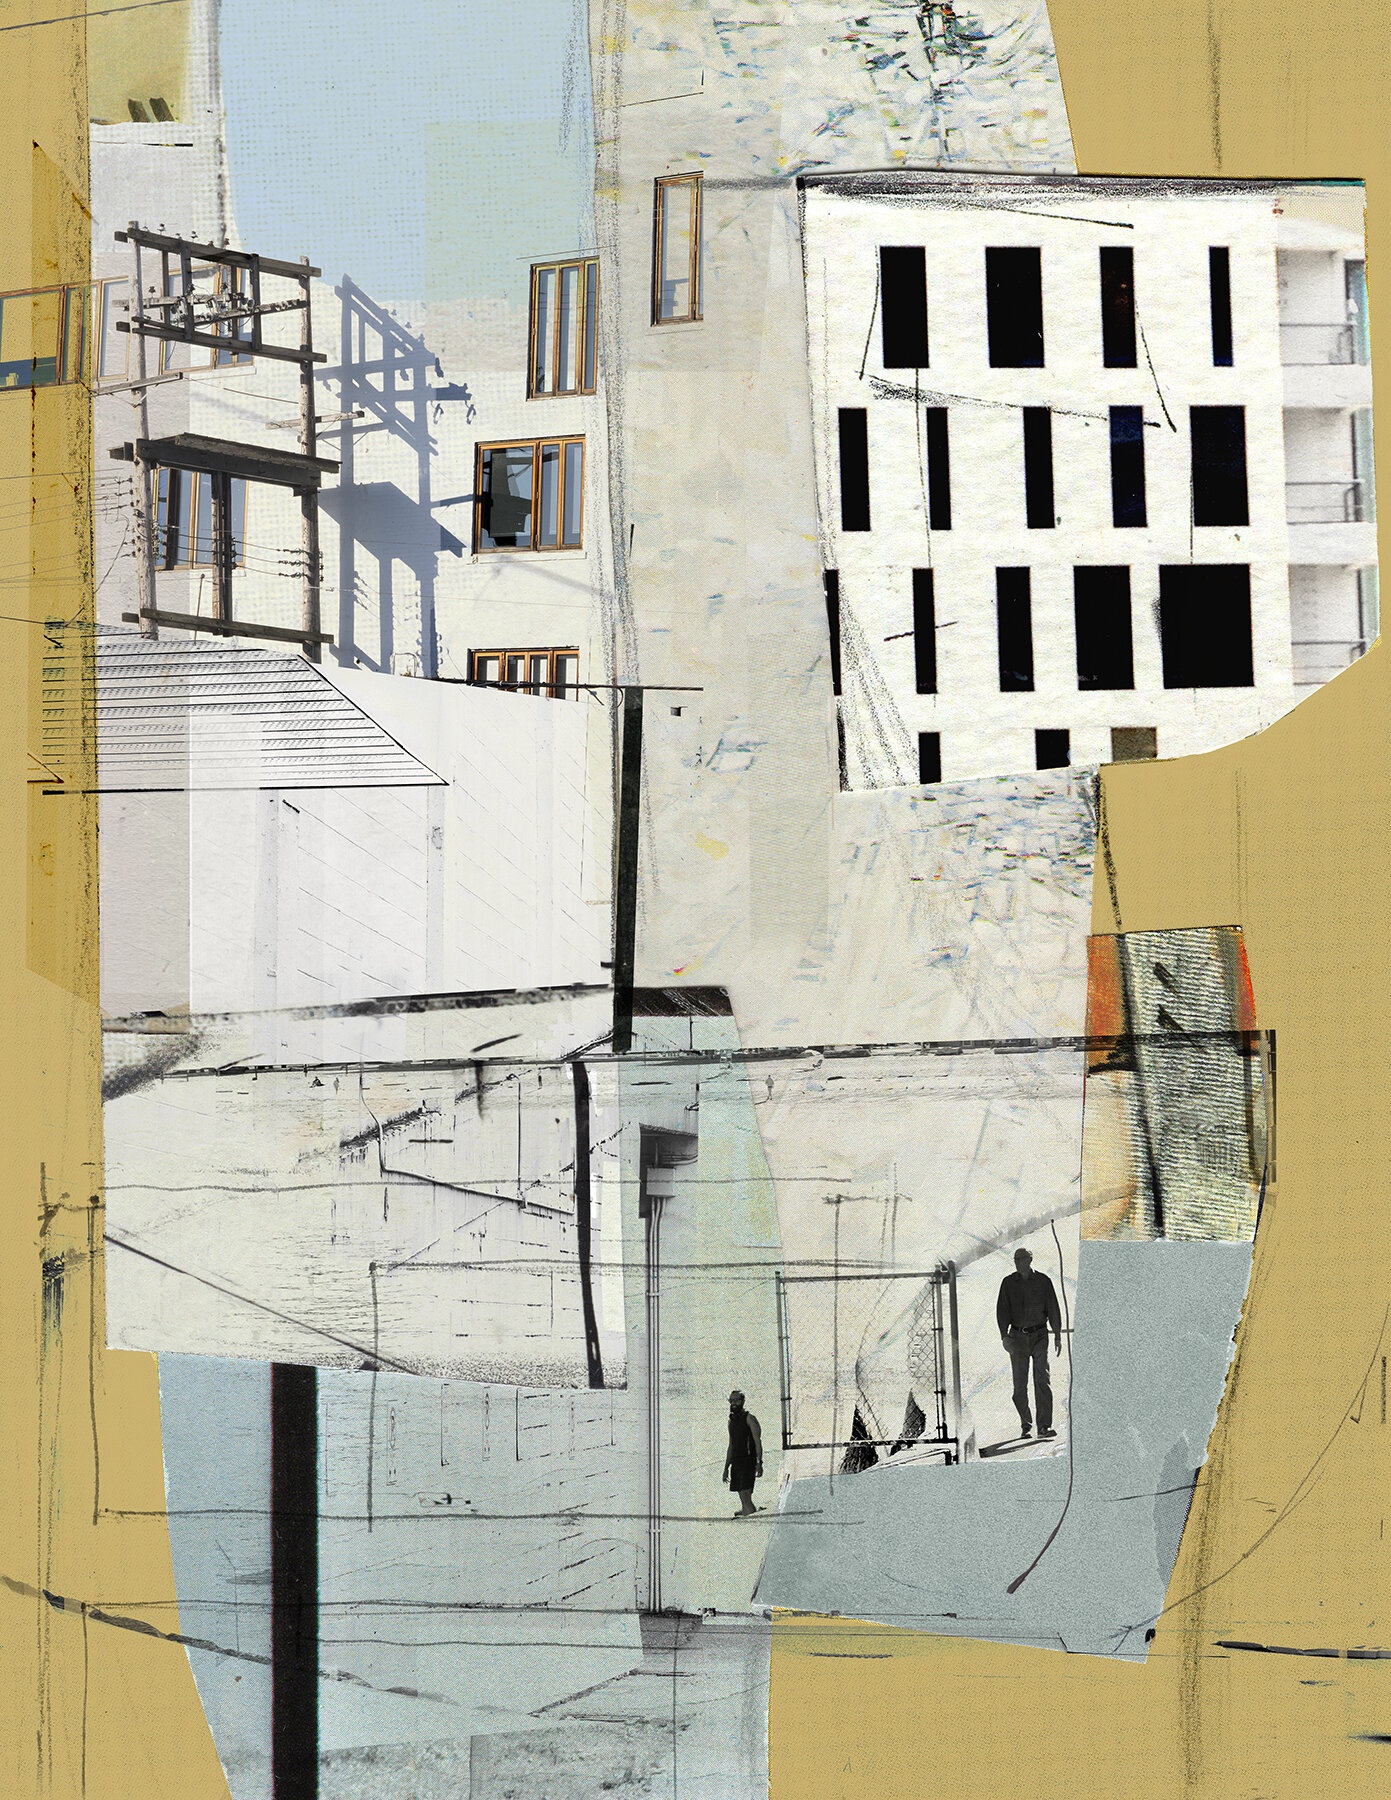 “In Recalling a City (2021)”, from the series “If We Were to Talk about Architecture”  by Barbara Strigel